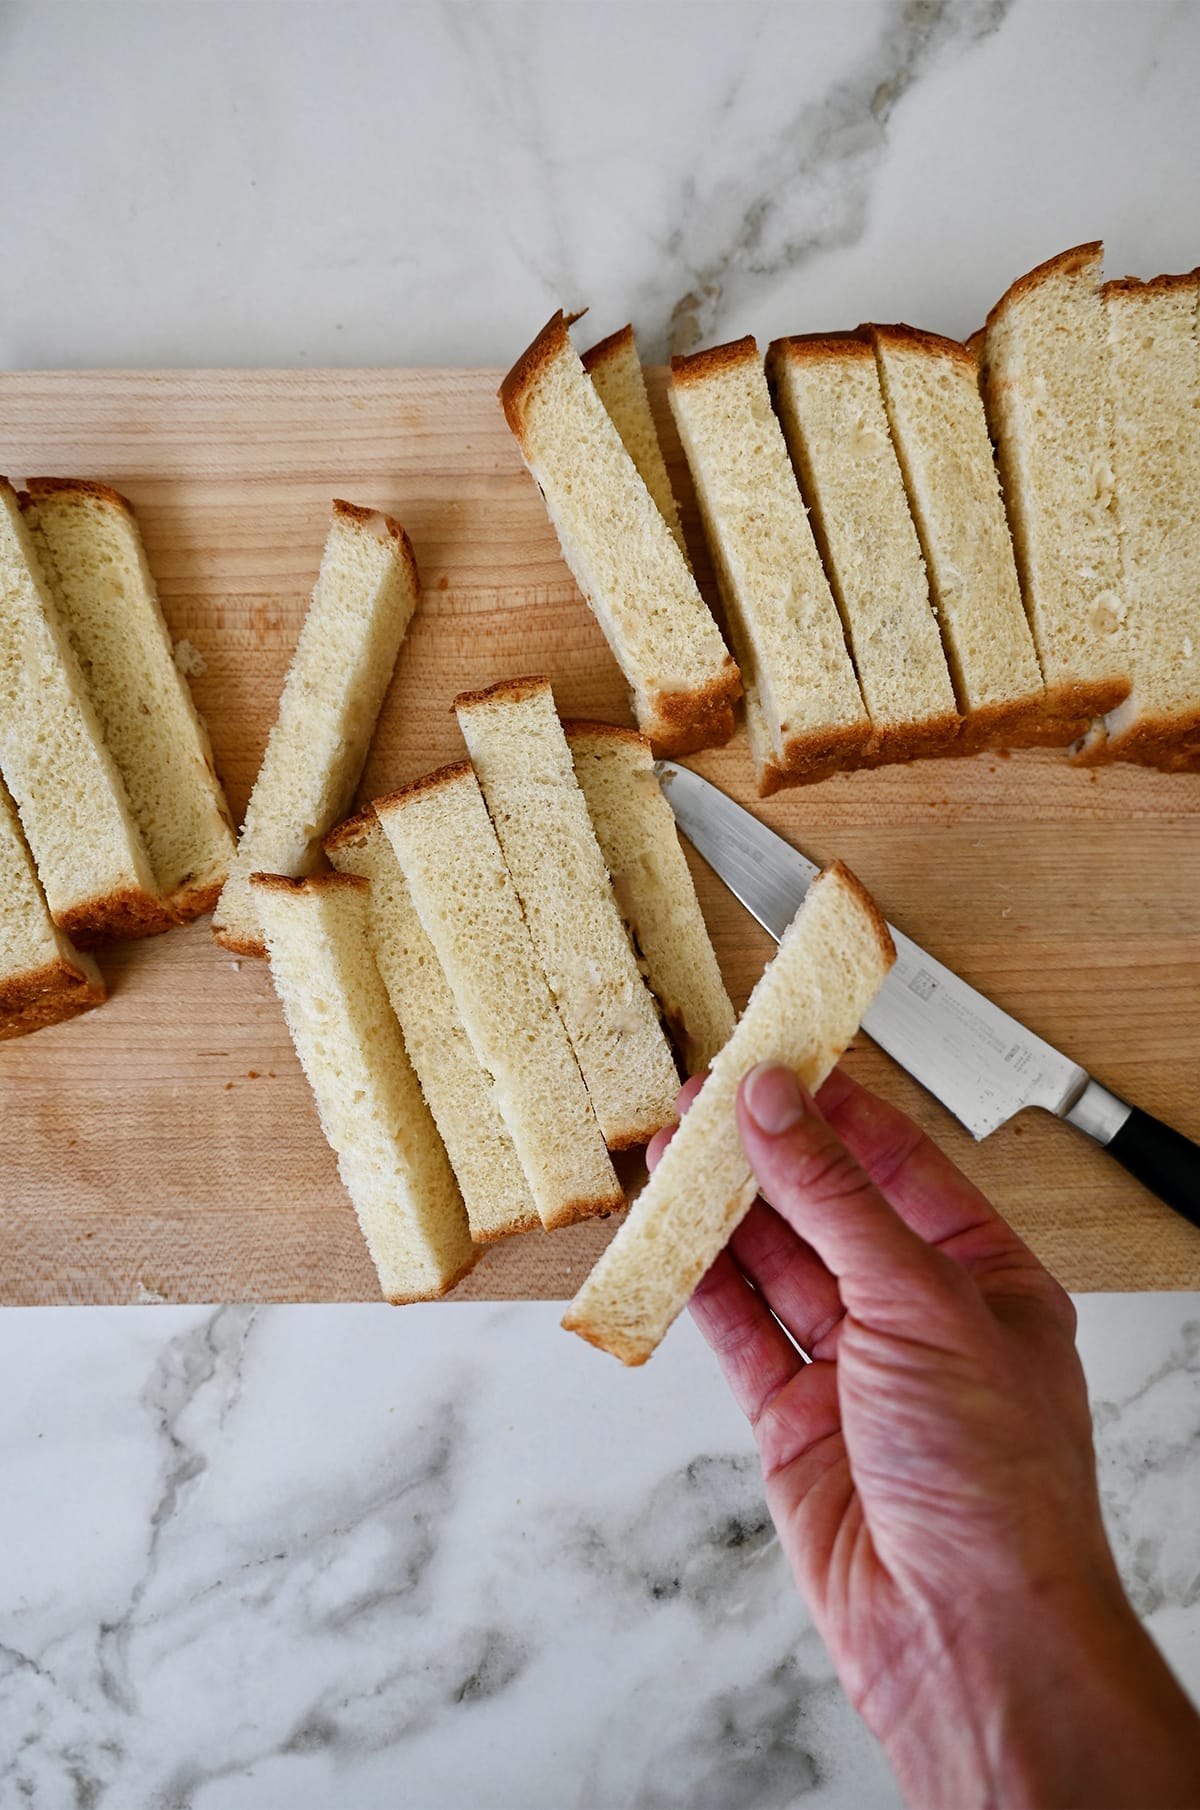 Slices of Texas toast on a cutting board with a hand holding one slice.